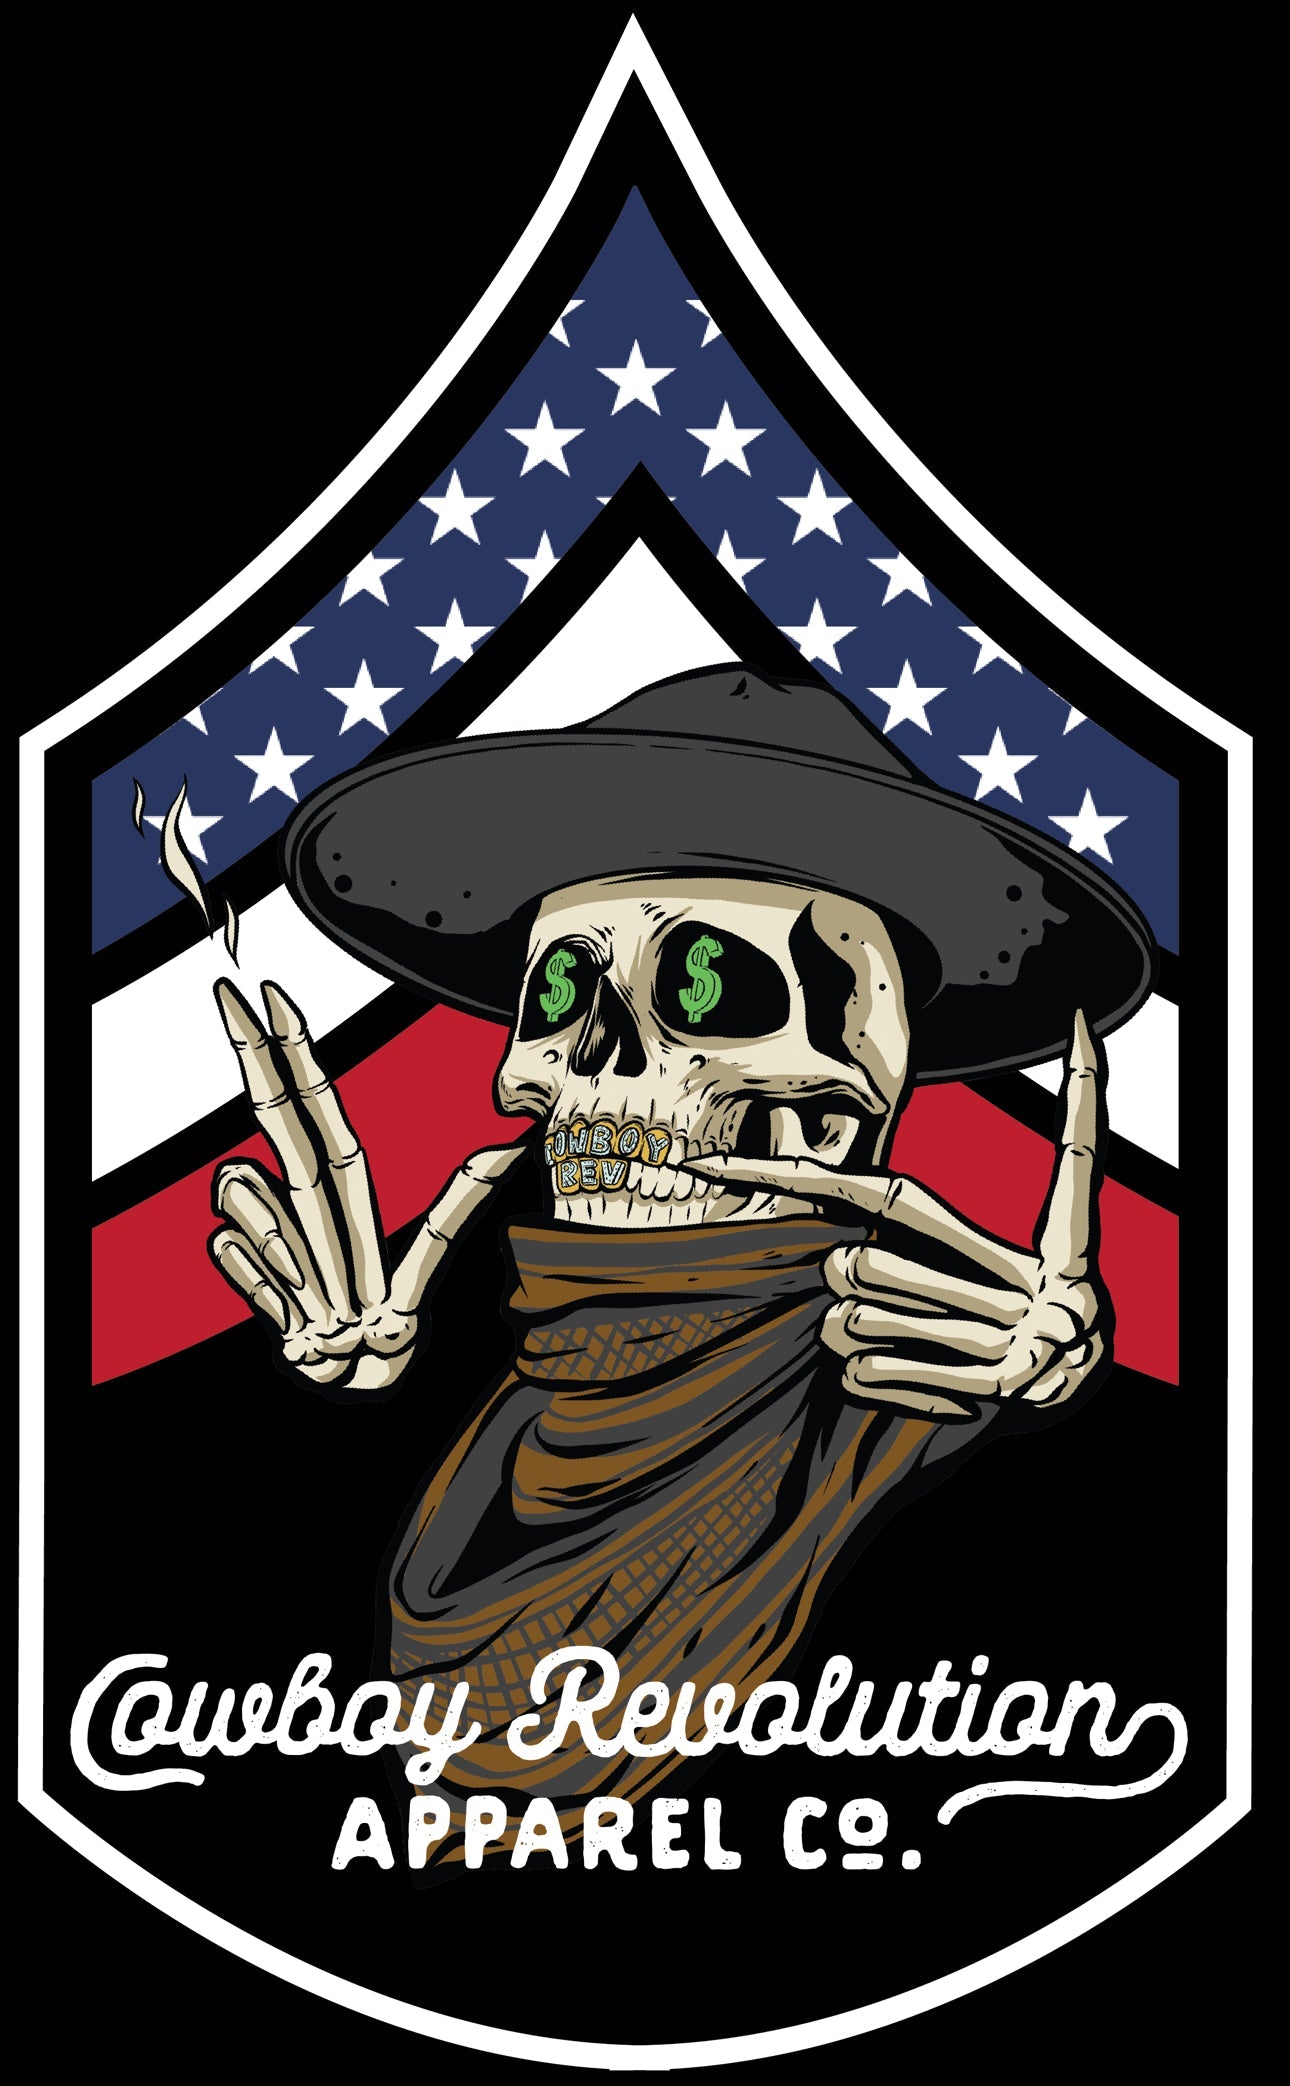 “American Gangster” Cowboy Revolution Apparel Co. Iron-On Patch & Sticker Set